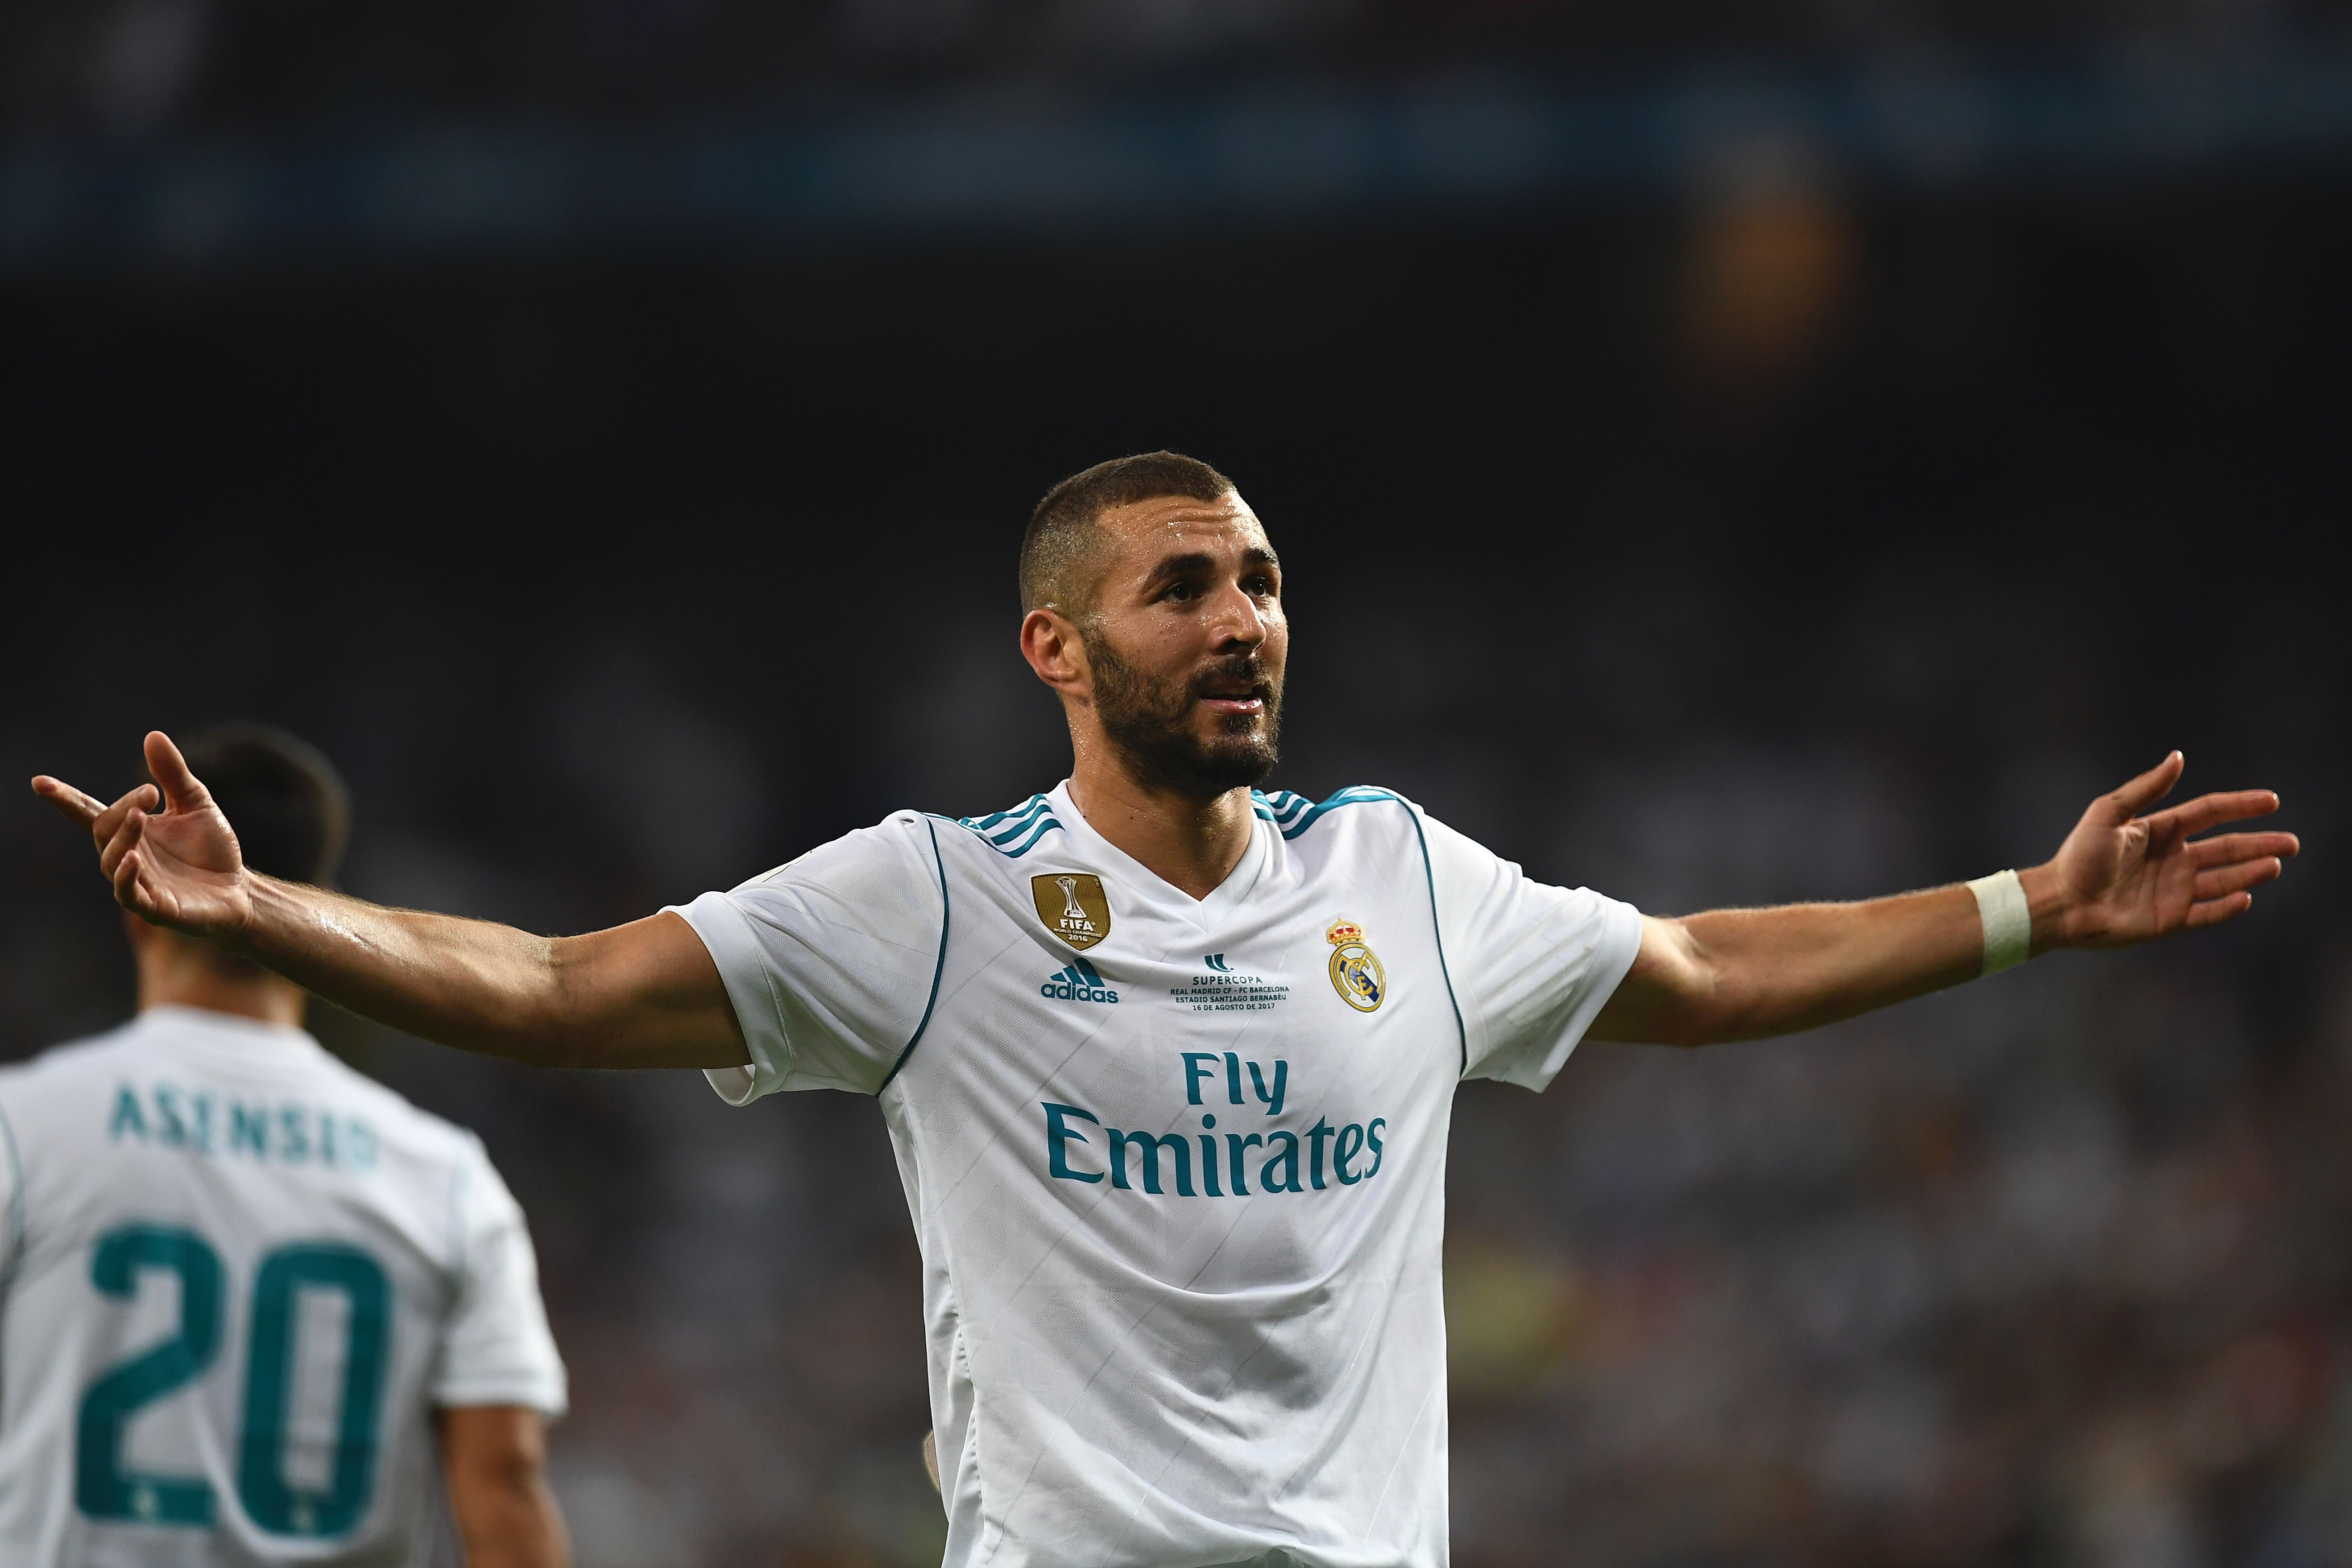 Real Madrid's French forward Karim Benzema celebrates after scoring their second goal during the second leg of the Spanish Supercup football match Real Madrid vs FC Barcelona at the Santiago Bernabeu stadium in Madrid, on August 16, 2017. / AFP PHOTO / GABRIEL BOUYS        (Photo credit should read GABRIEL BOUYS/AFP/Getty Images)